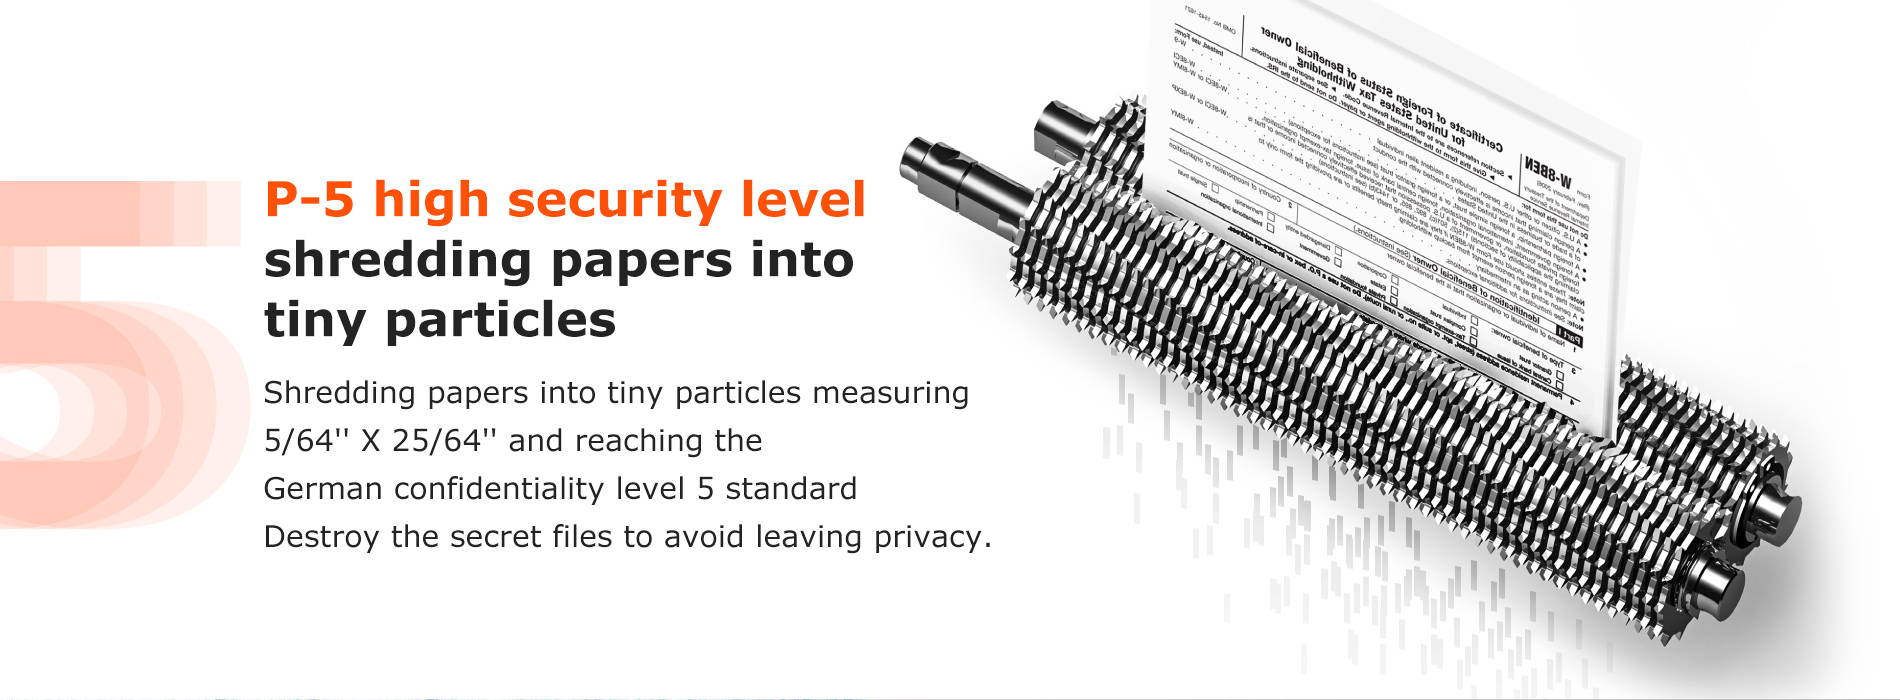 P-5 high security level shredding papers into tiny particles Shredding papers into tiny particles measuring  5/64'' X 25/64'' and reaching the German confidentiality level 5 standard Destroy the secret files to avoid leaving privacy.